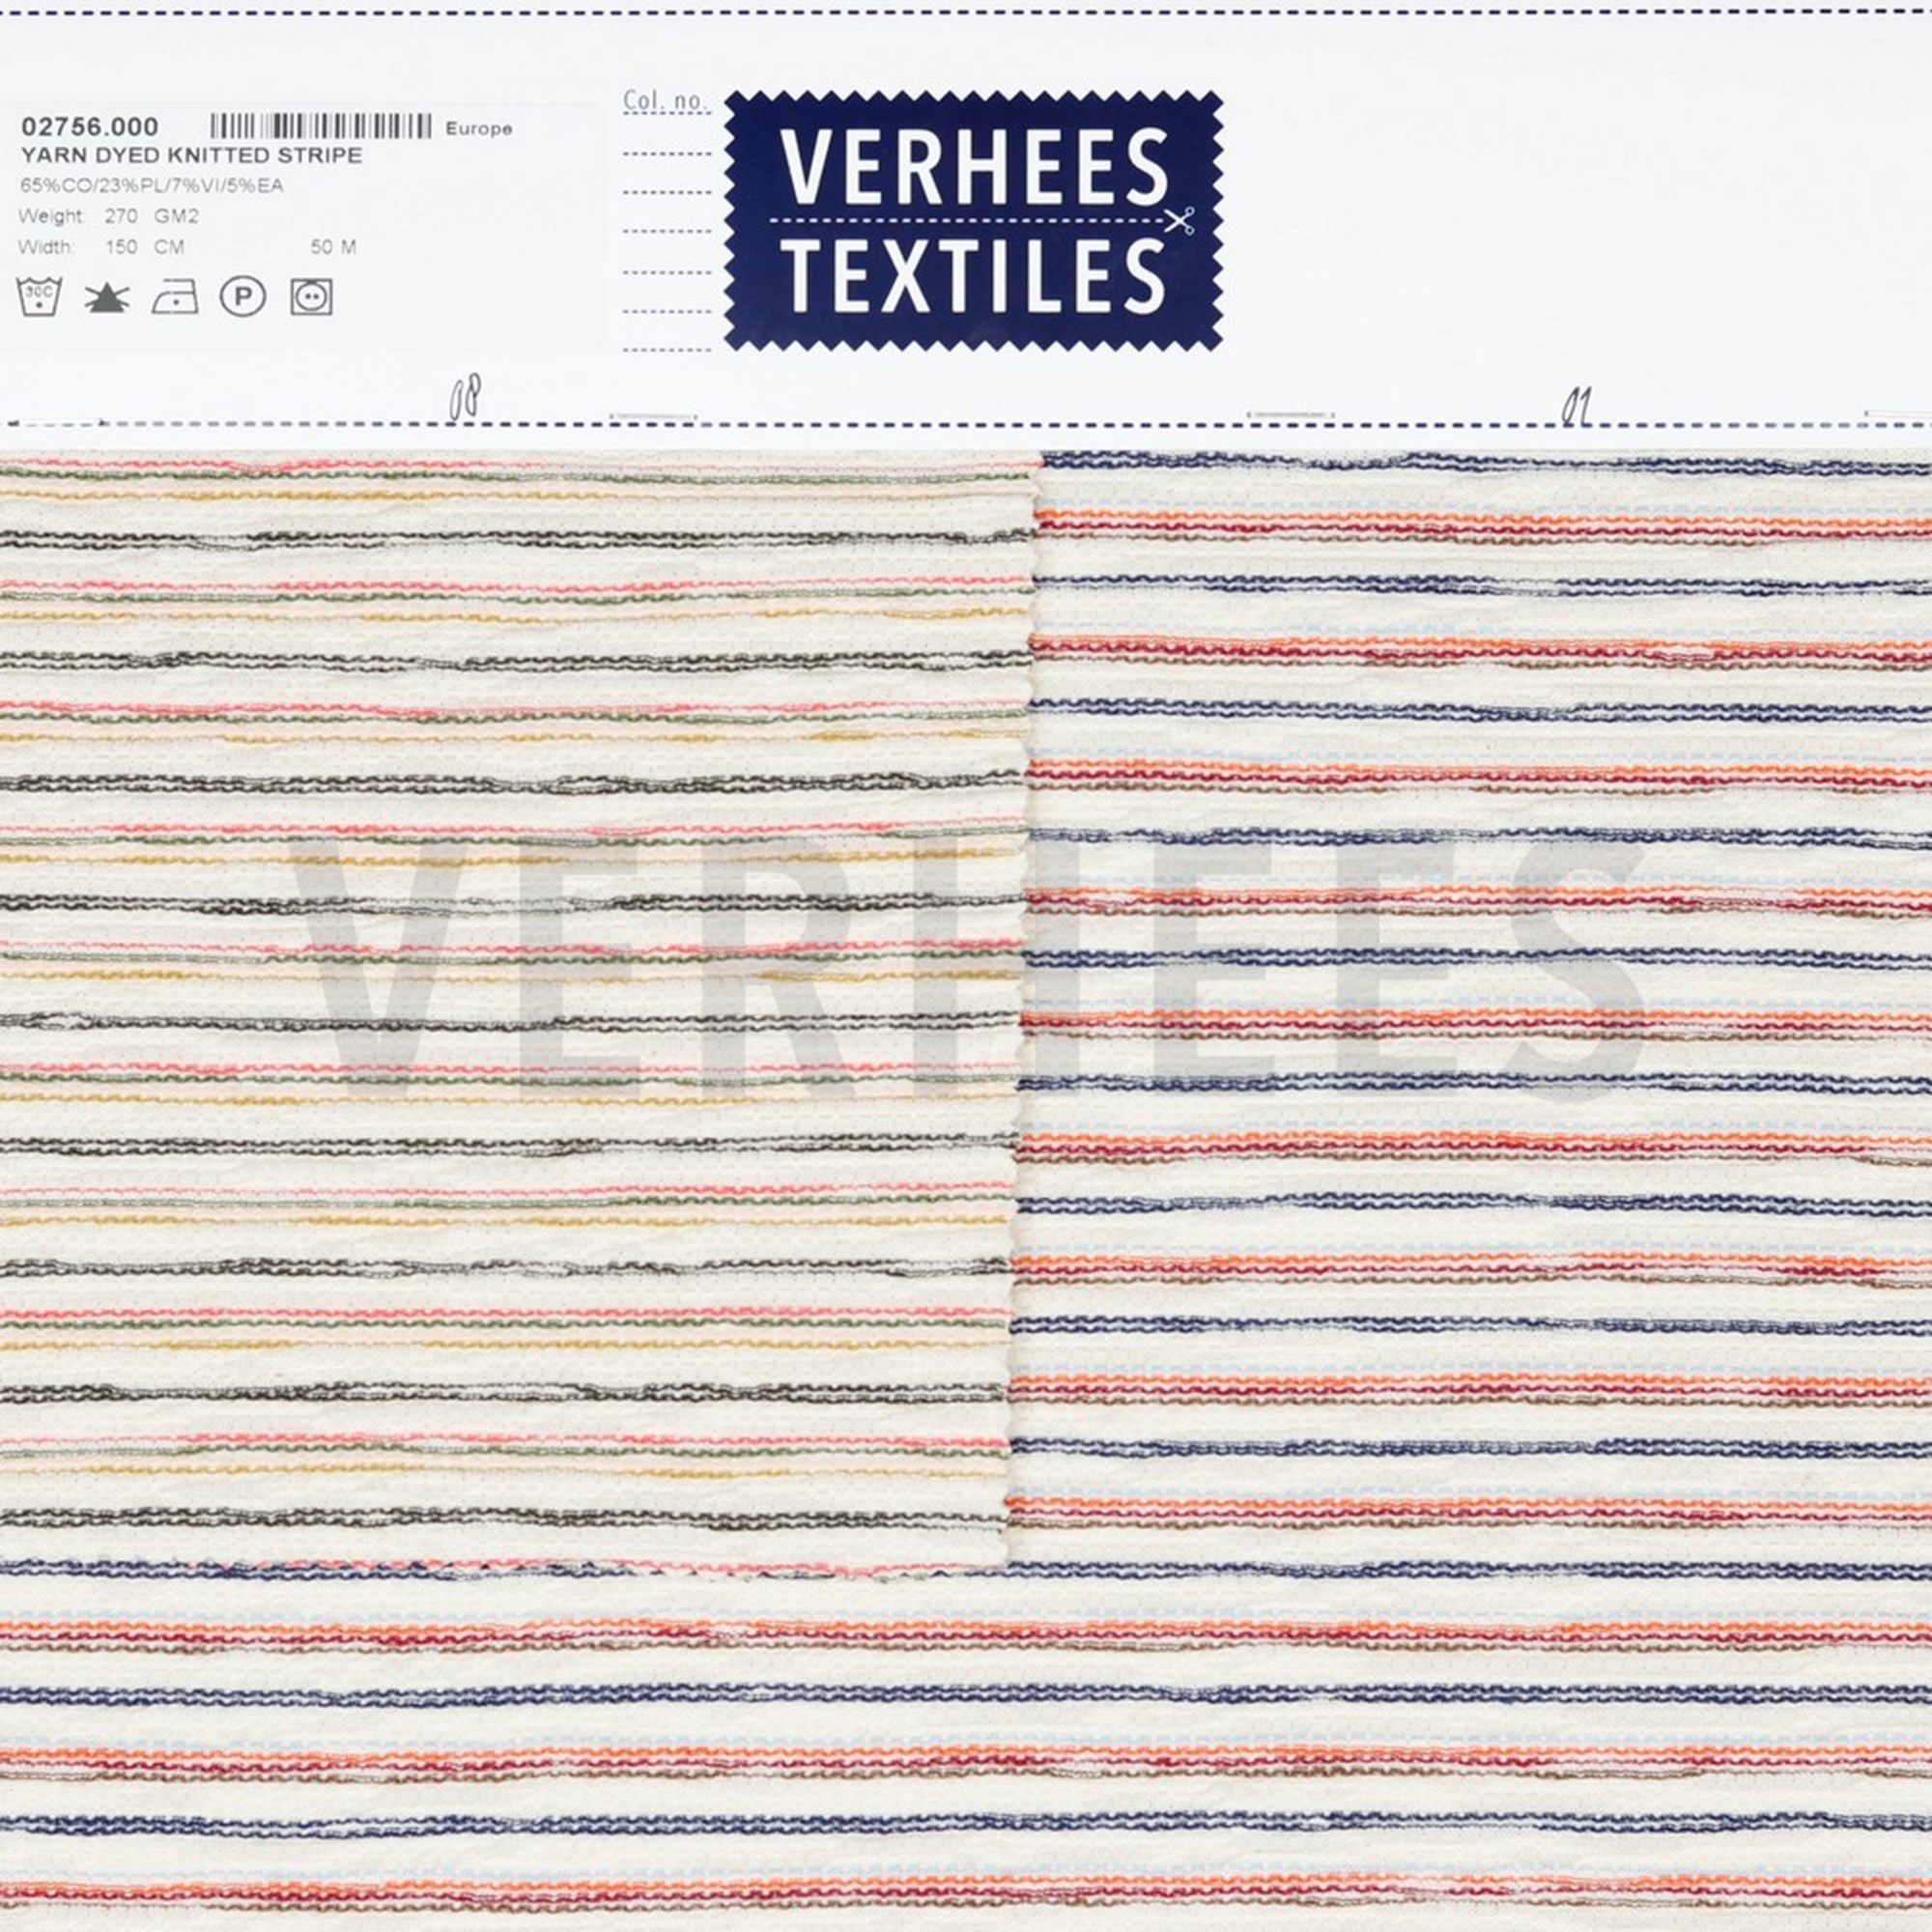 YARN DYED KNITTED STRIPE MULTICOLOUR (high resolution) #4